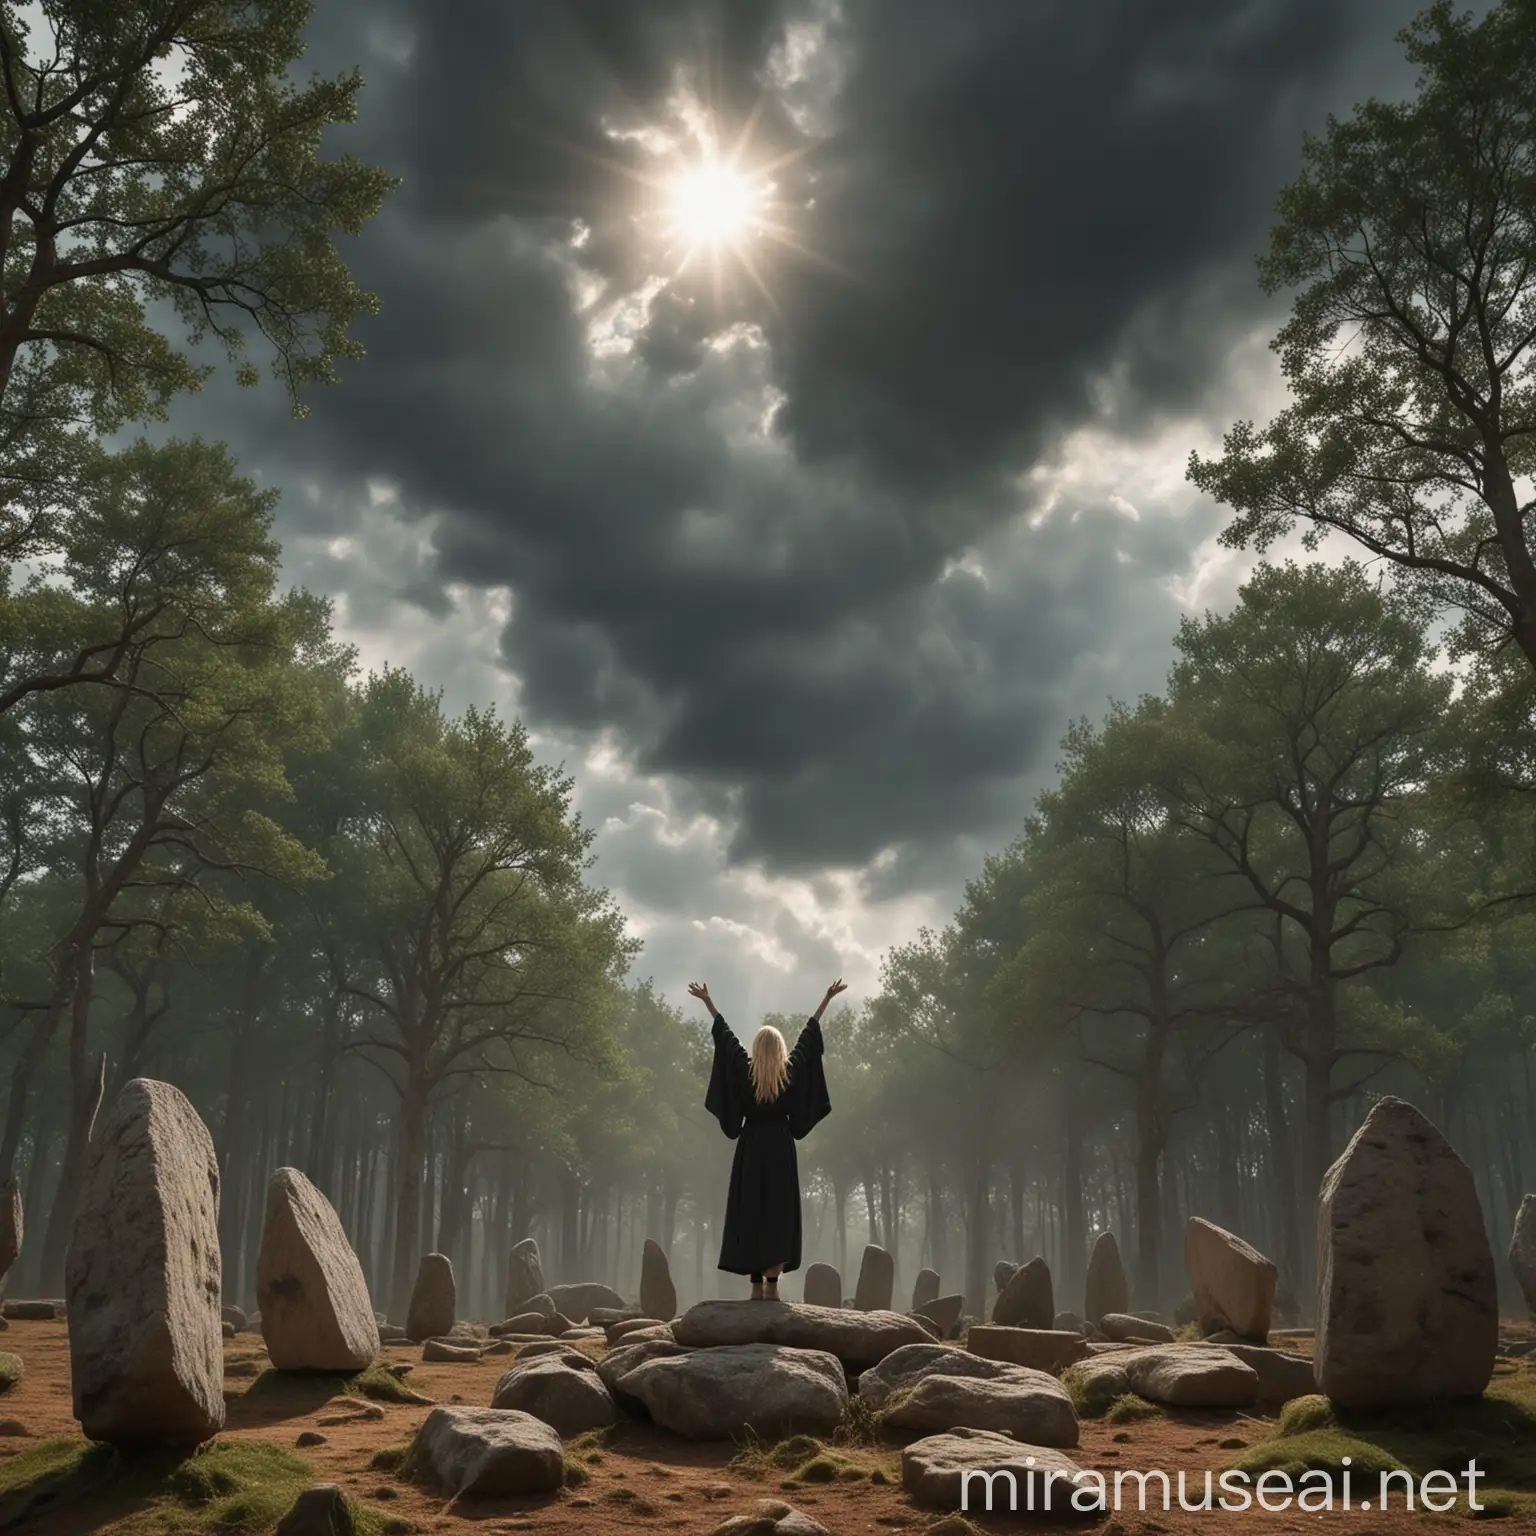 A blond woman, wearing a dark ritual robe, standing on top of a 2 meters high dolmen, in the middle of a clearing, in a flat oak forest area. She's raising her arms towards a bright sun. The sky is 
slowly darkening with storm clouds all around the scene